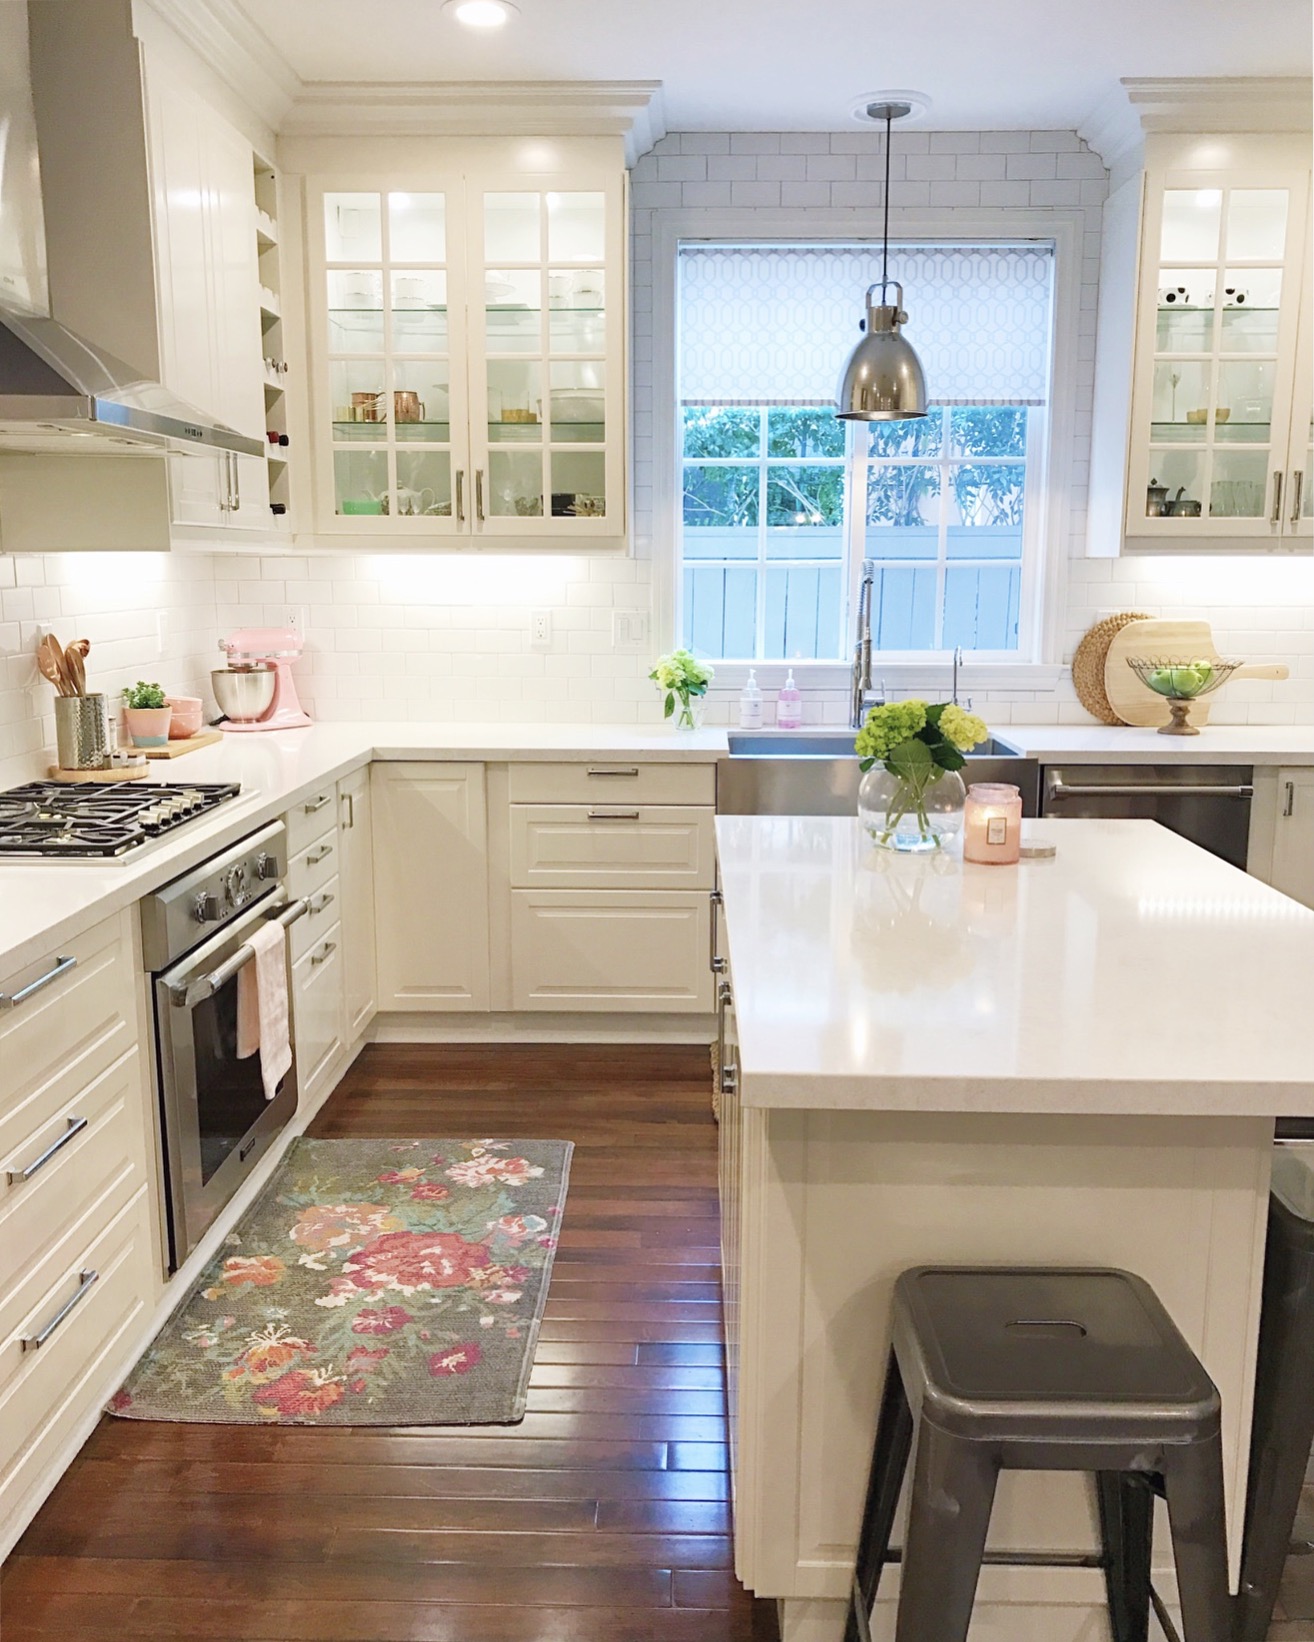 How to Customize Your IKEA Kitchen 10 Tips to Make it Look Custom